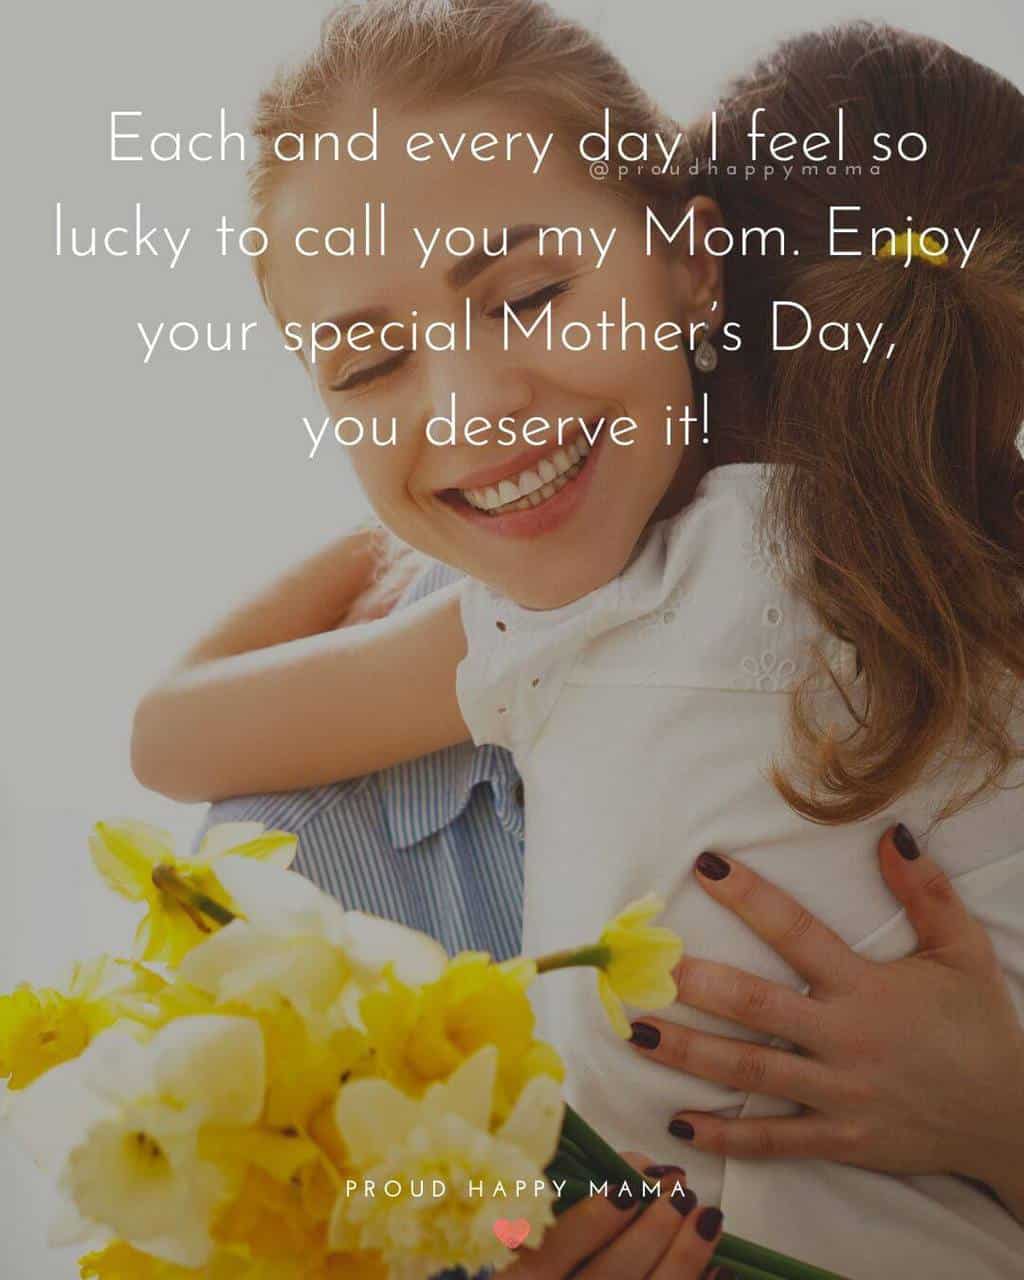 75+ Mother’s Day Quotes From Daughter to Warm Mom's Heart